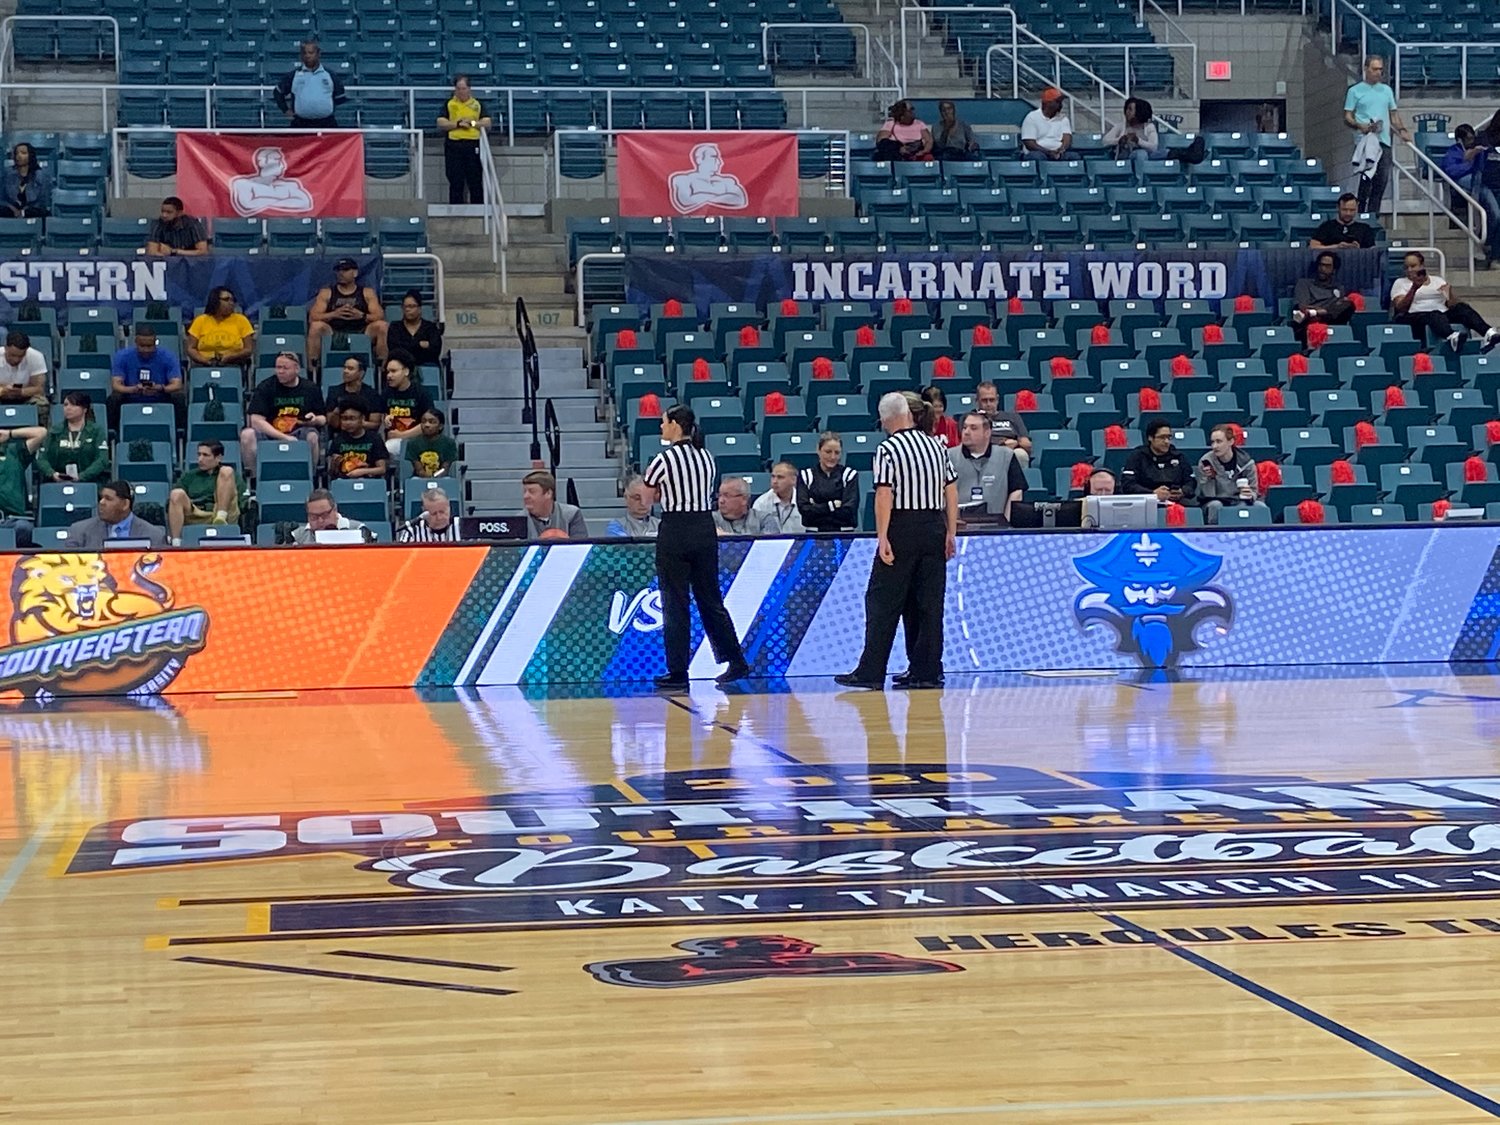 Game officials wait at the scorer's table to hear word on a decision from Southland Conference presidents prior to tip-off of the Southeastern Louisiana-New Orleans women's basketball game at the Merrell Center in Katy. It was ultimately decided to cancel the tournament.